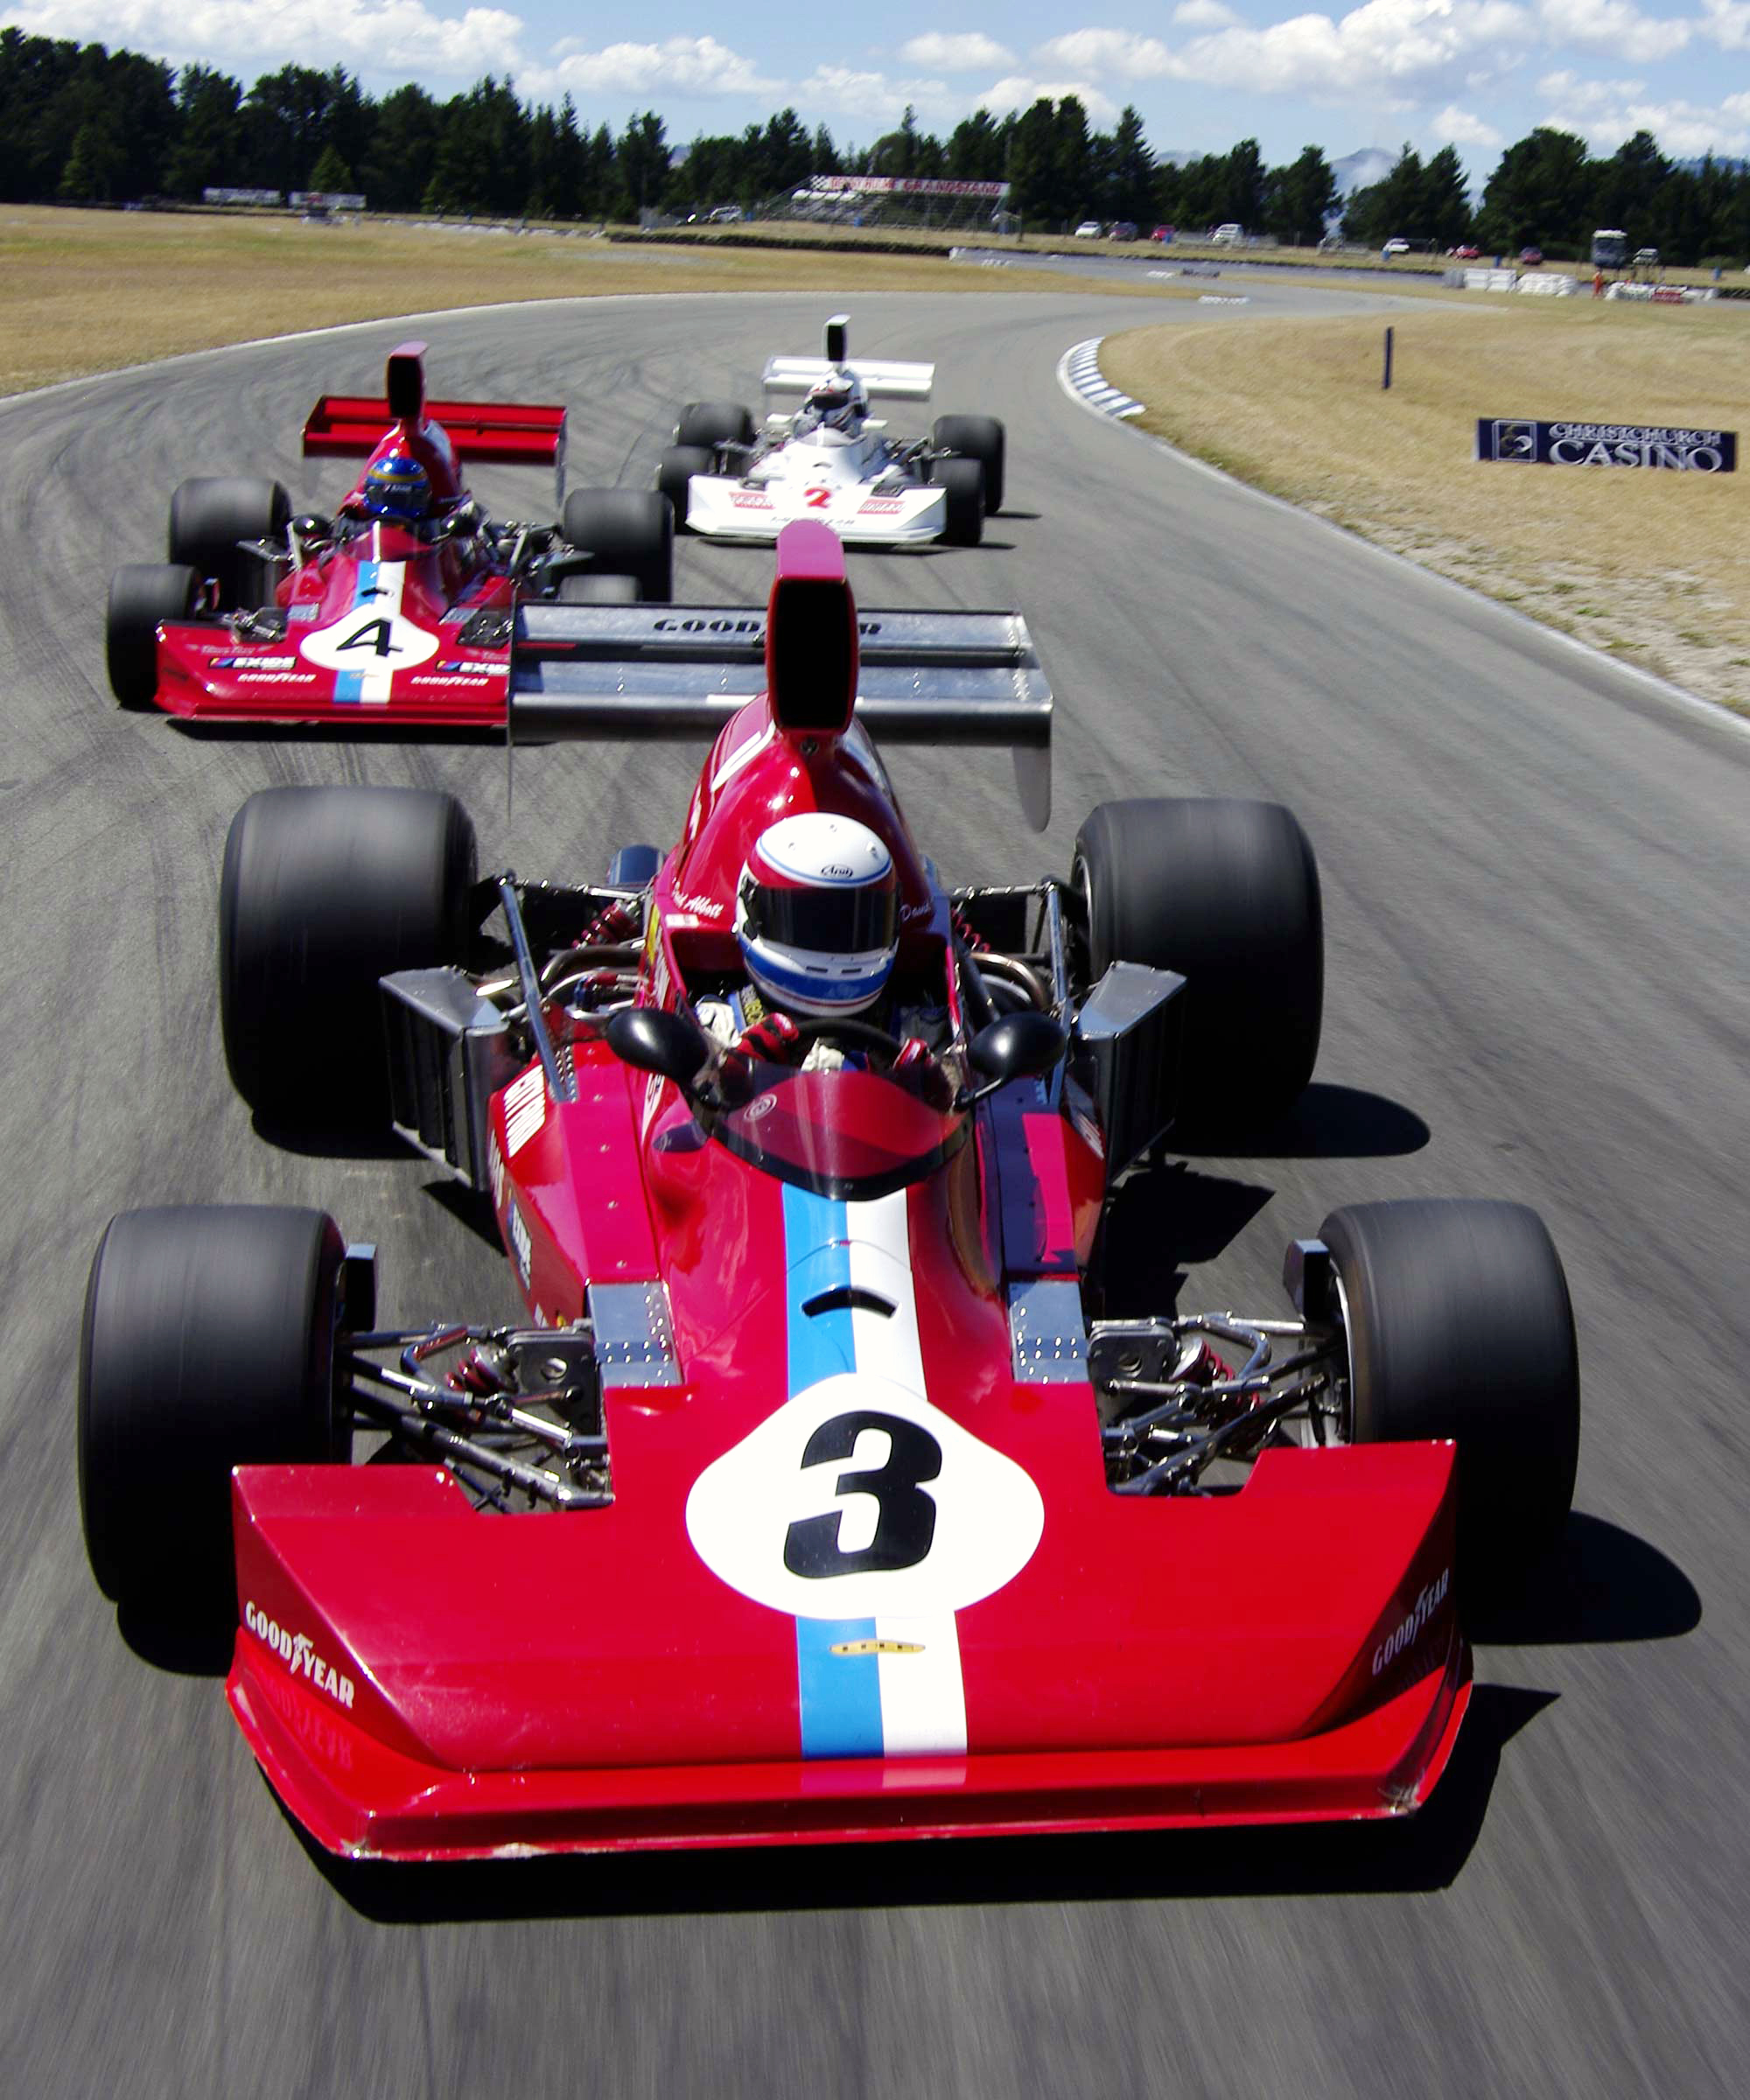 More than fifty F5000s line up for Hampton Downs